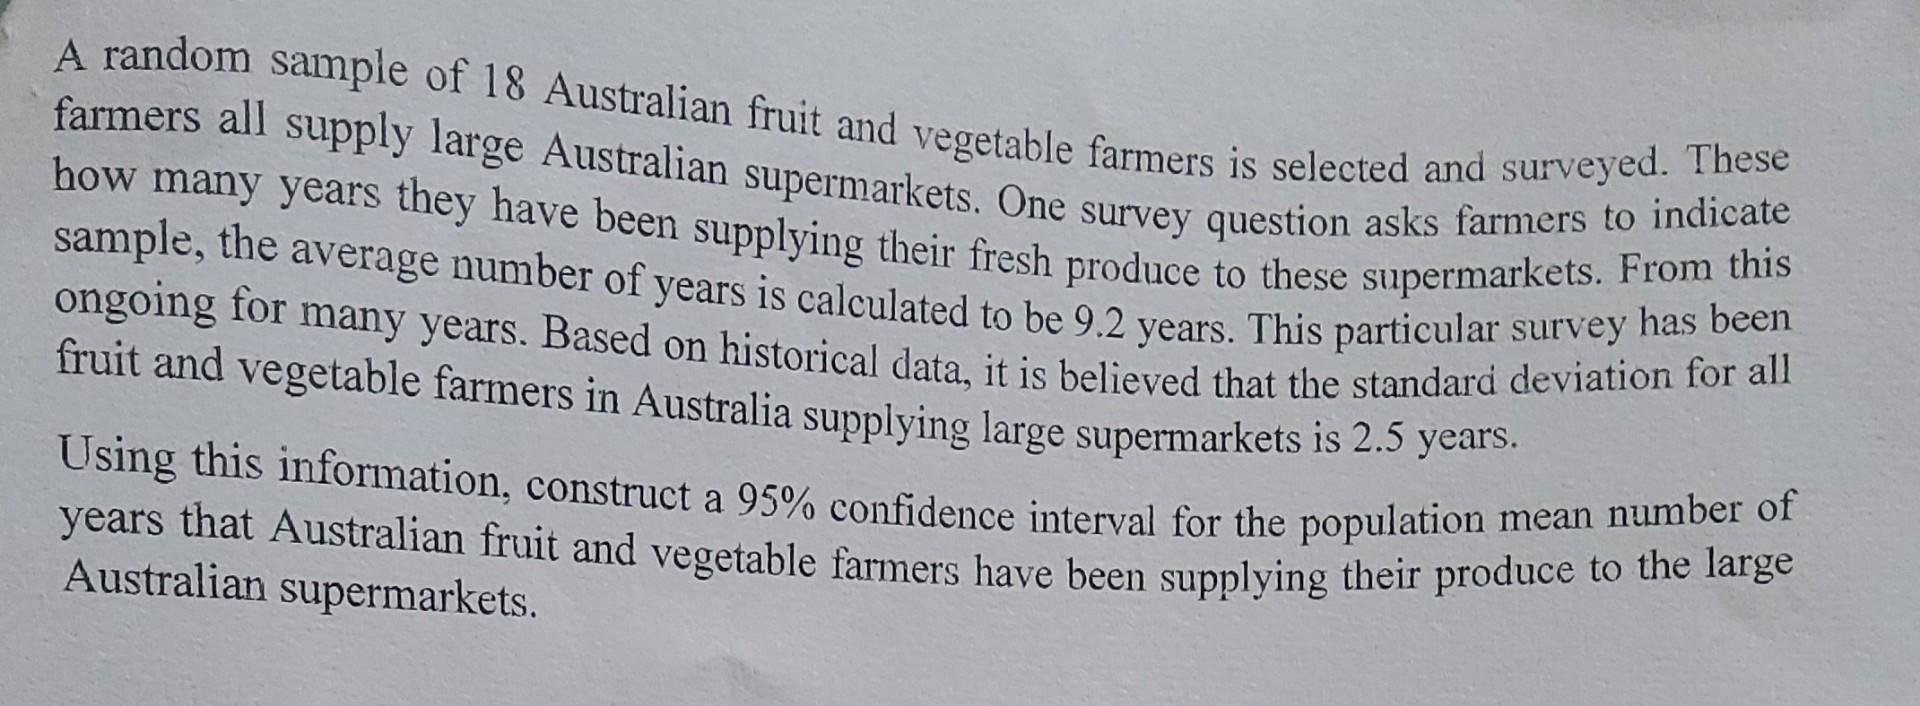 A random sample of 18 Australian fruit and vegetable farmers is selected and surveyed. These farmers all supply large Austral